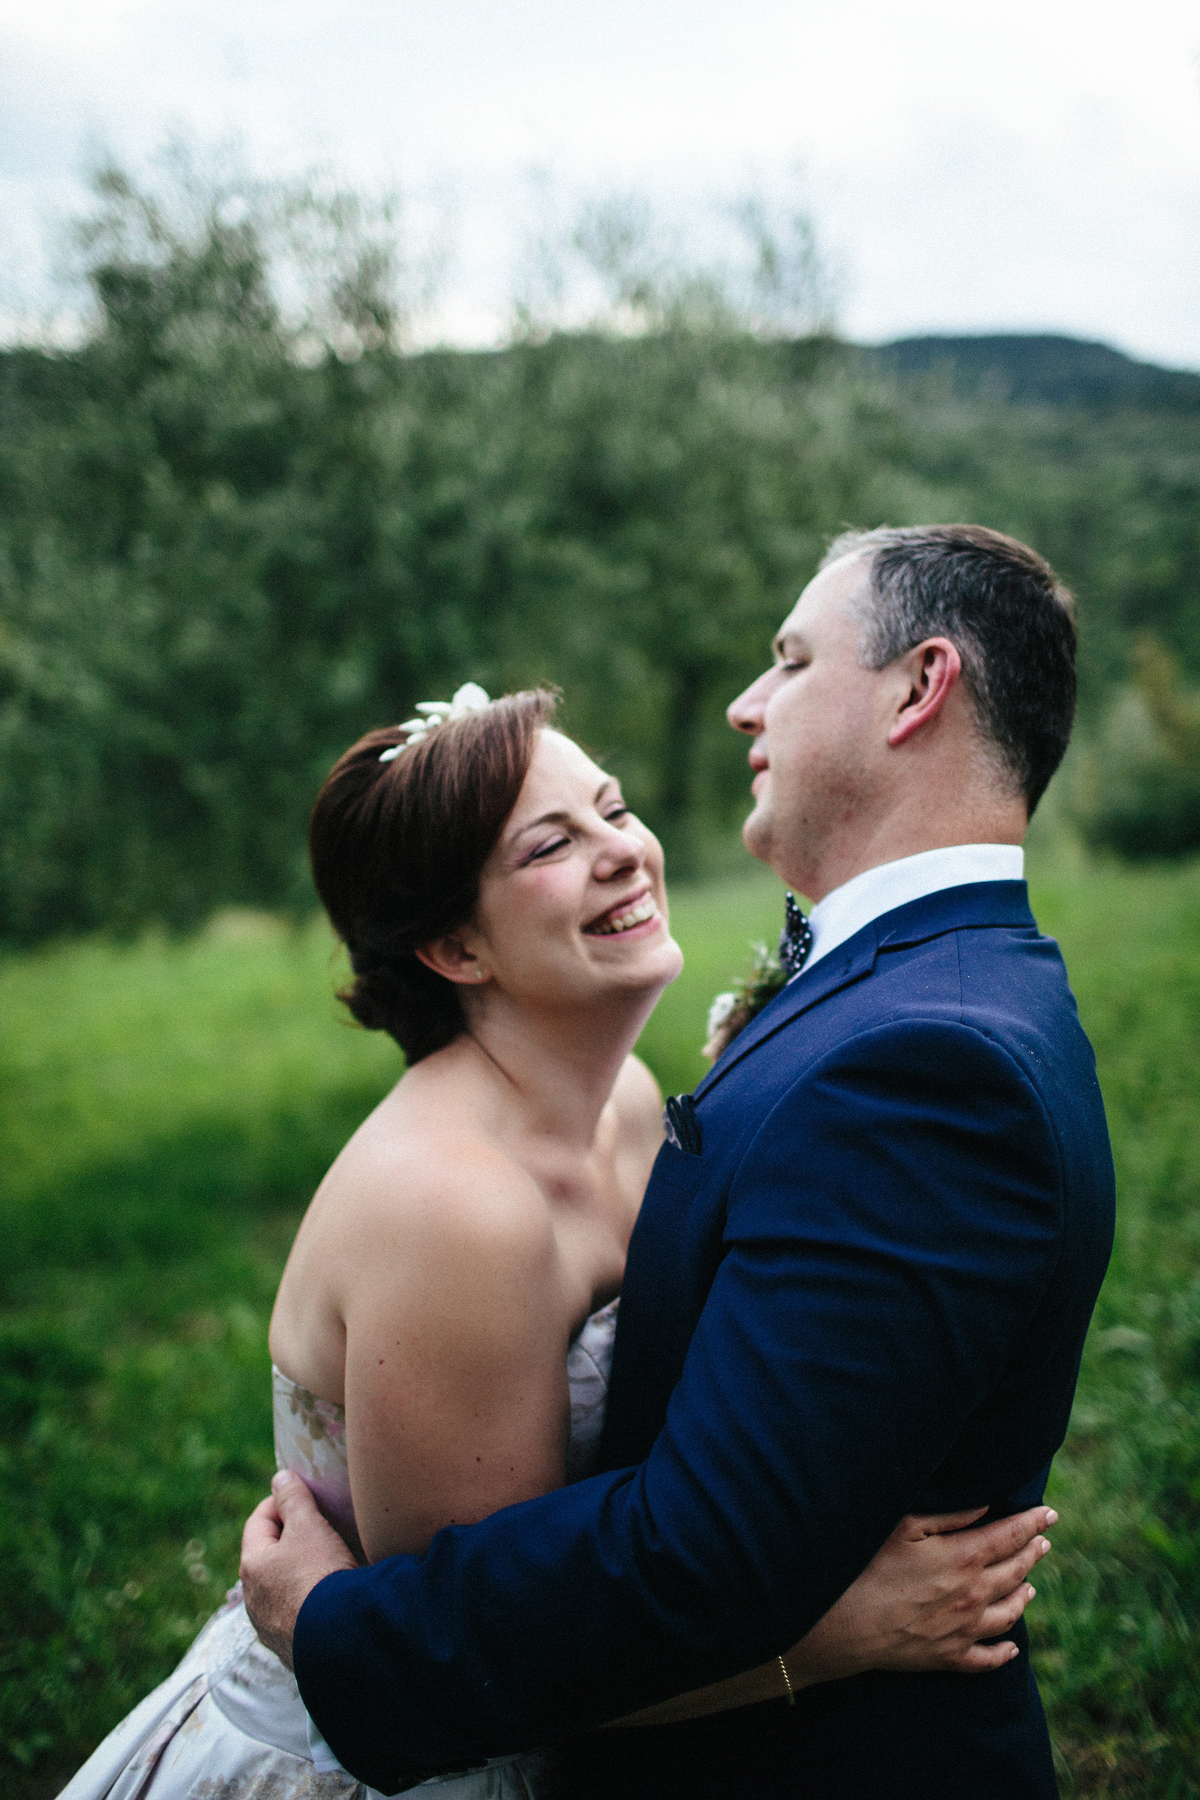 Bride Lucy wore a gold floral Vera Wang gown for her romantic outdoor wedding in the Italian countryside. Images captured by Claudia Rose Carter.